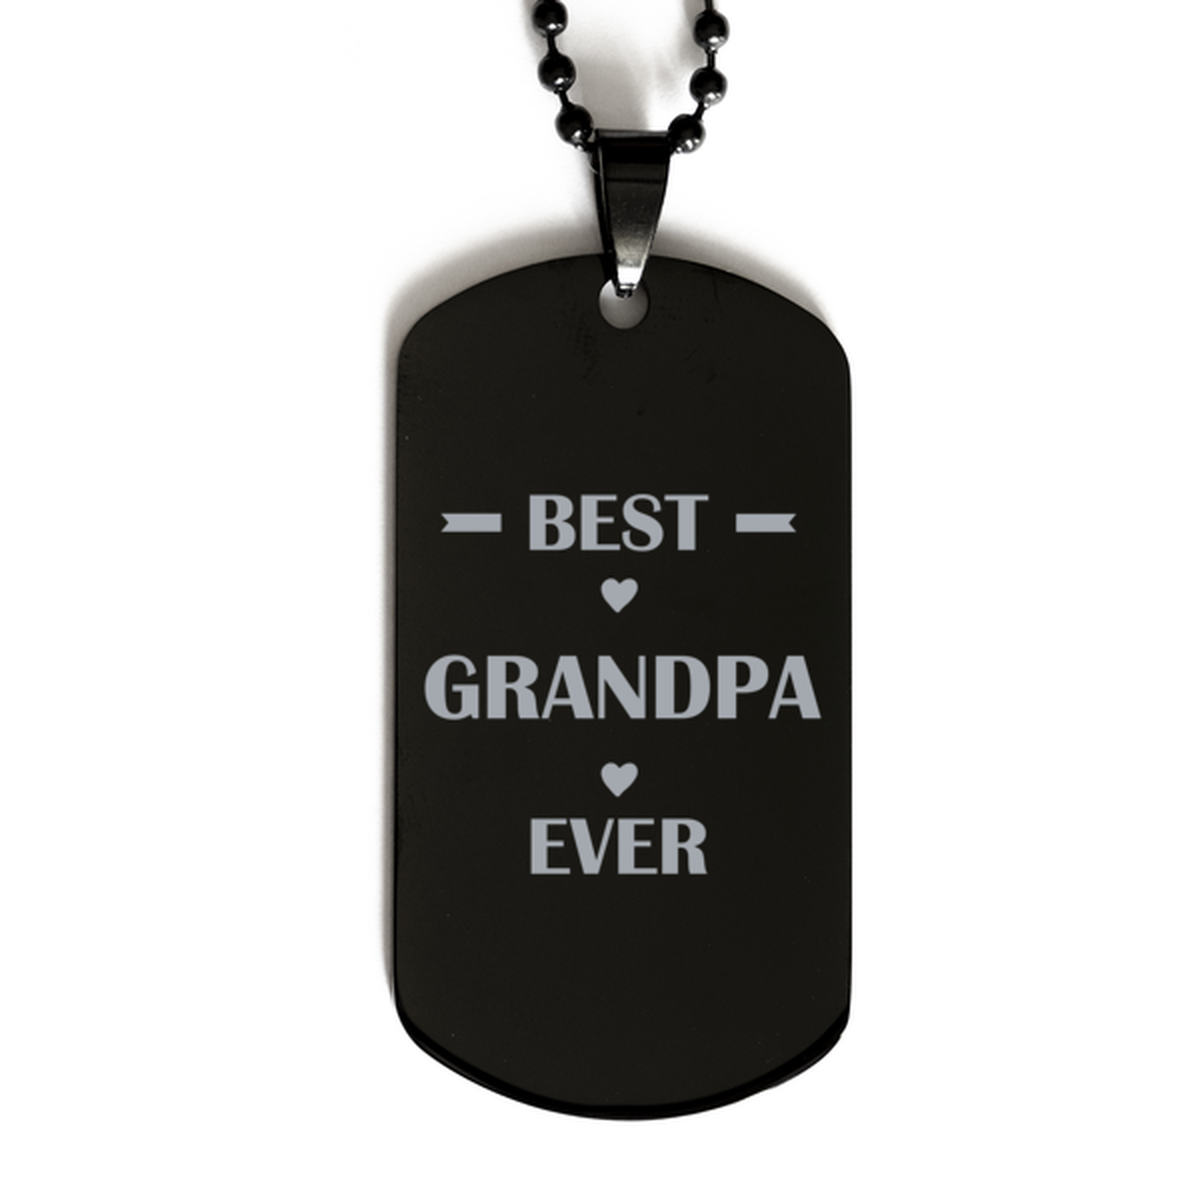 Best Grandpa Ever Grandpa Gifts, Funny Black Dog Tag For Grandpa, Birthday Family Presents Engraved Necklace For Men